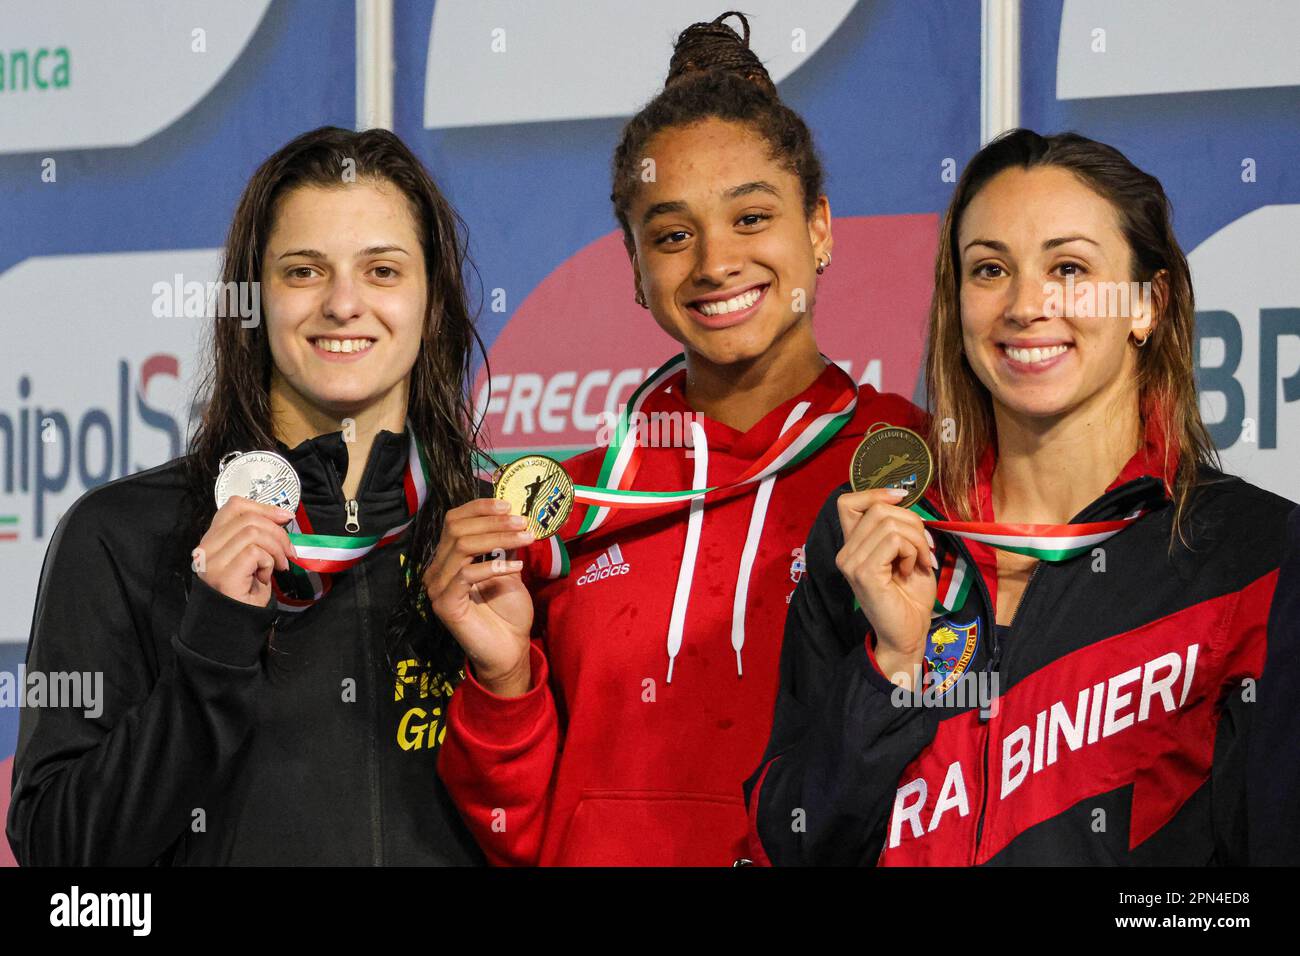 Riccione, Italy. 16th Apr, 2023. Curtis Sara (Team Dimensione Nuoto), Di Pietro Silvia (Centro Sp.vo Carabinieri), Cocconcelli Costanza (Fiamme Gialle) 50 freestyle female medal ceremony at the UnipolSai Absolute Italian Swimming Championship spring season 22/23 at Riccione (Italy) on 16th of April 2023 Credit: Independent Photo Agency/Alamy Live News Stock Photo